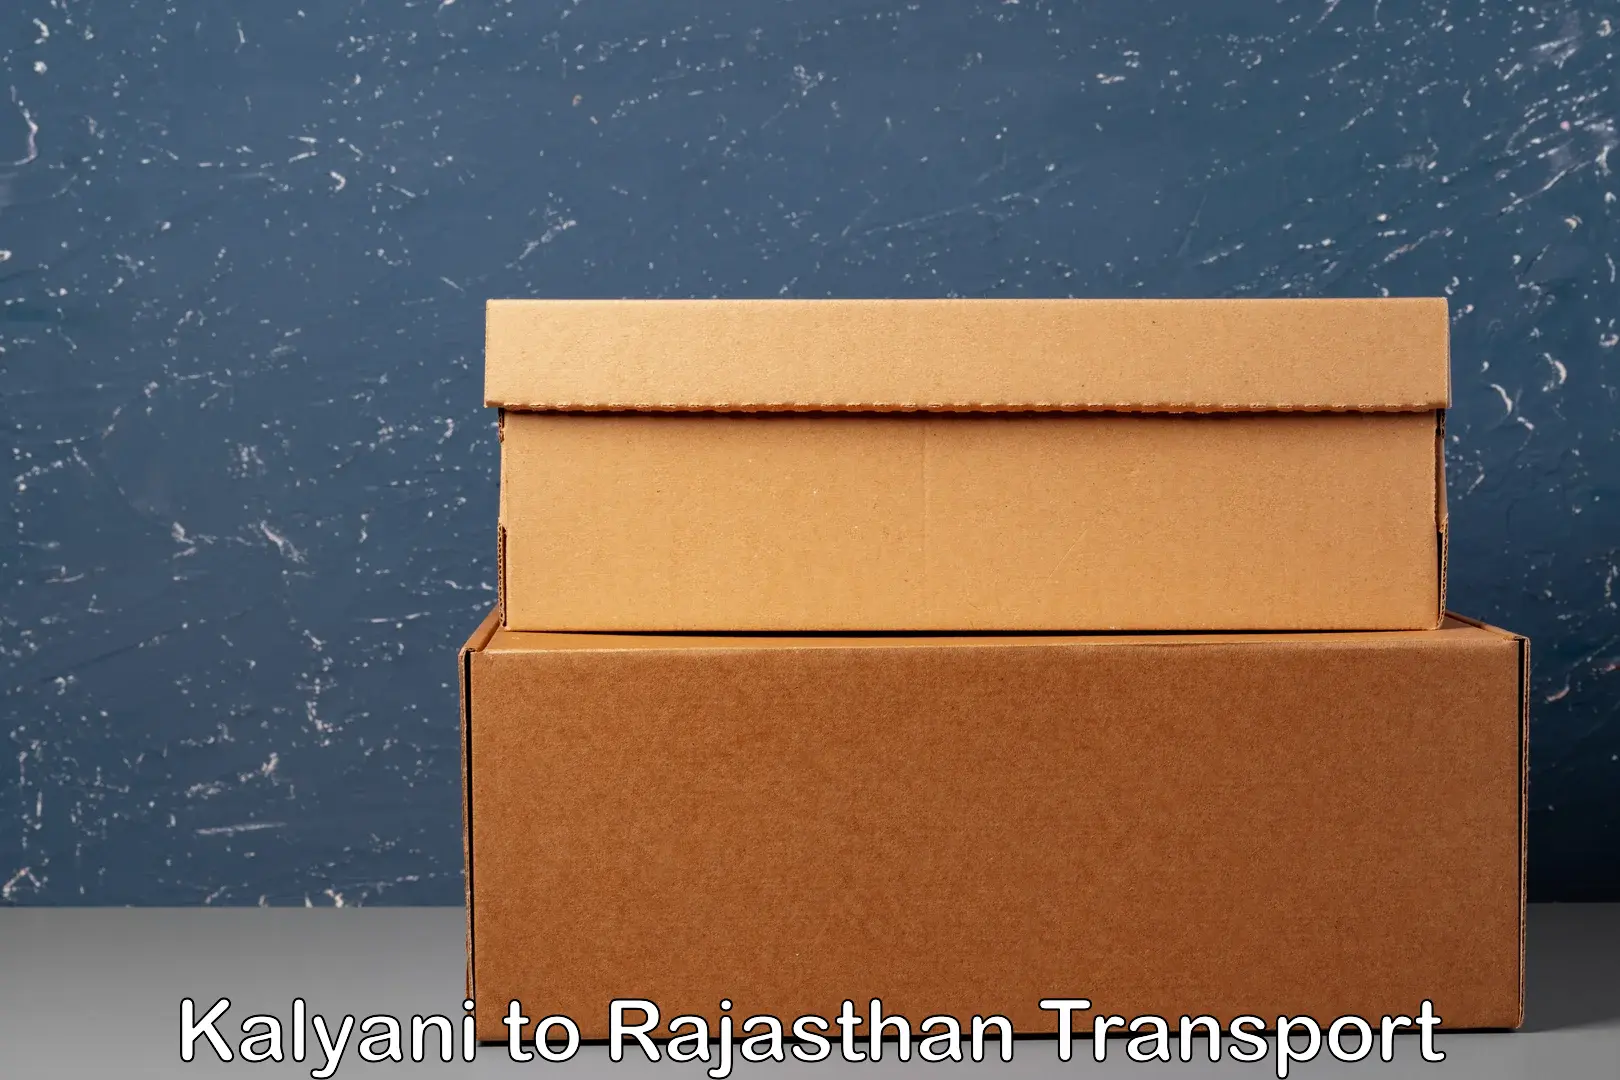 Container transport service Kalyani to Dholpur